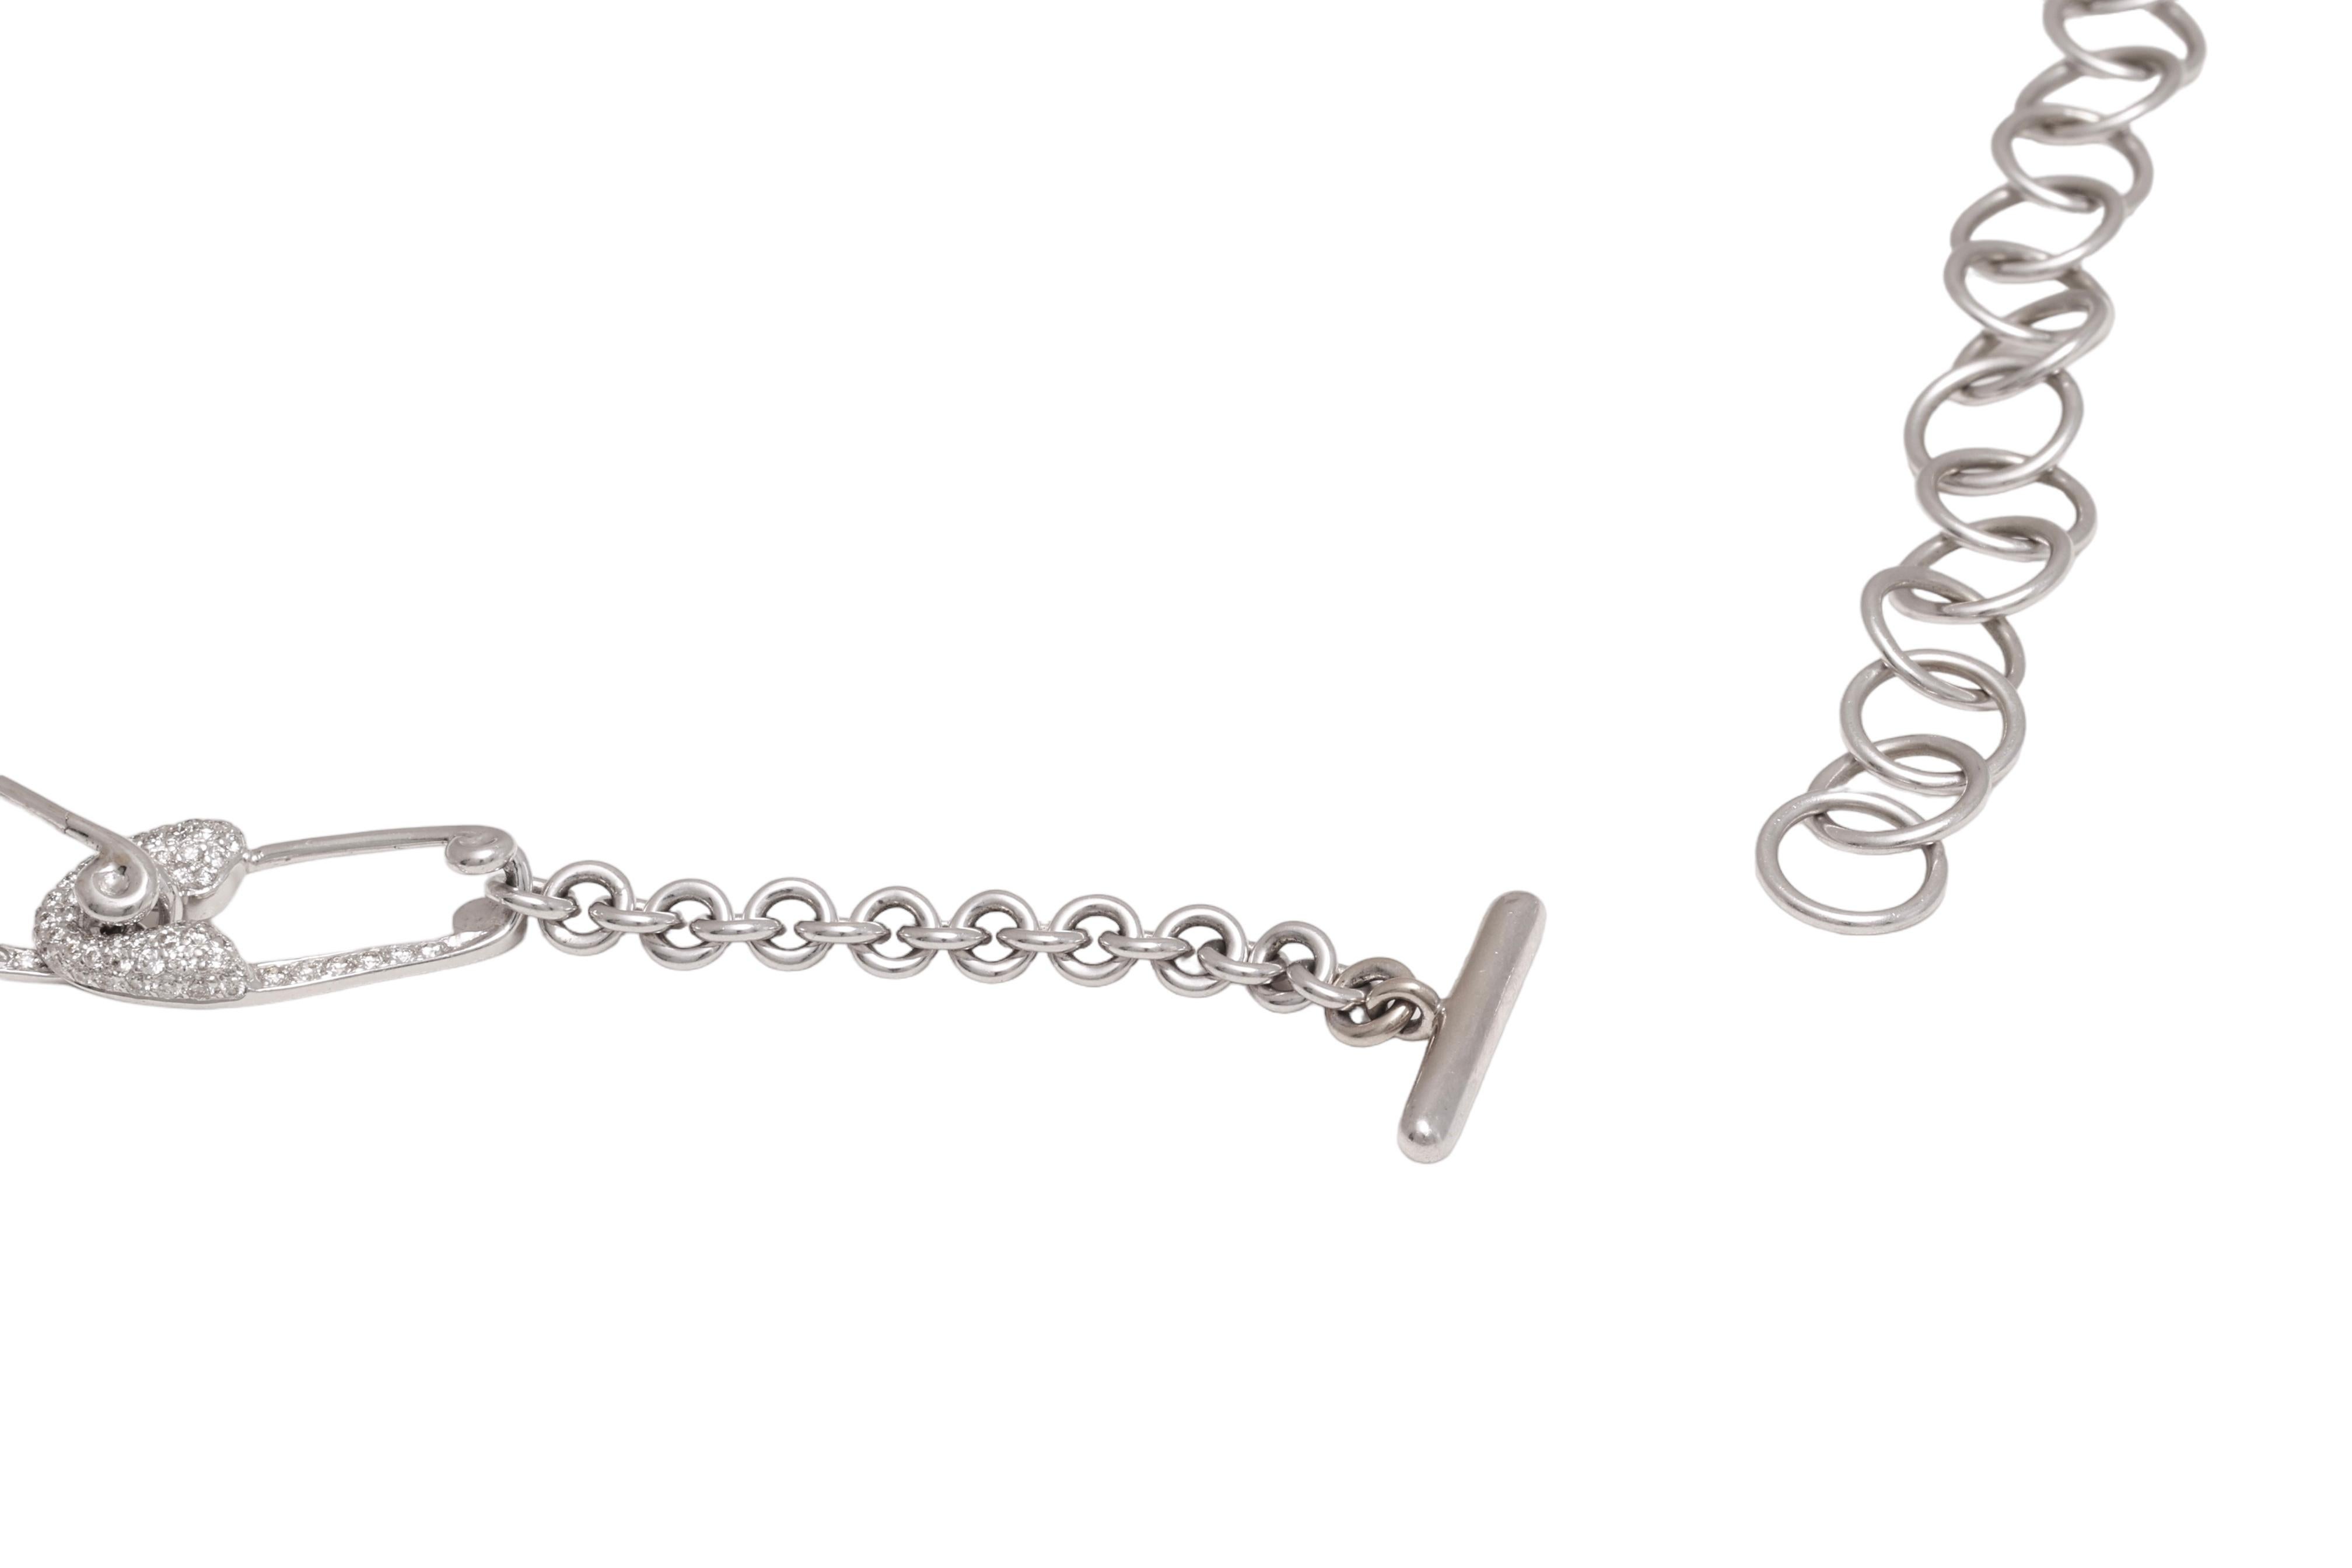 Women's or Men's Fabulous 18 kt. White Gold Interlocking Safety Pin Necklace With 5.6ct. Diamonds For Sale